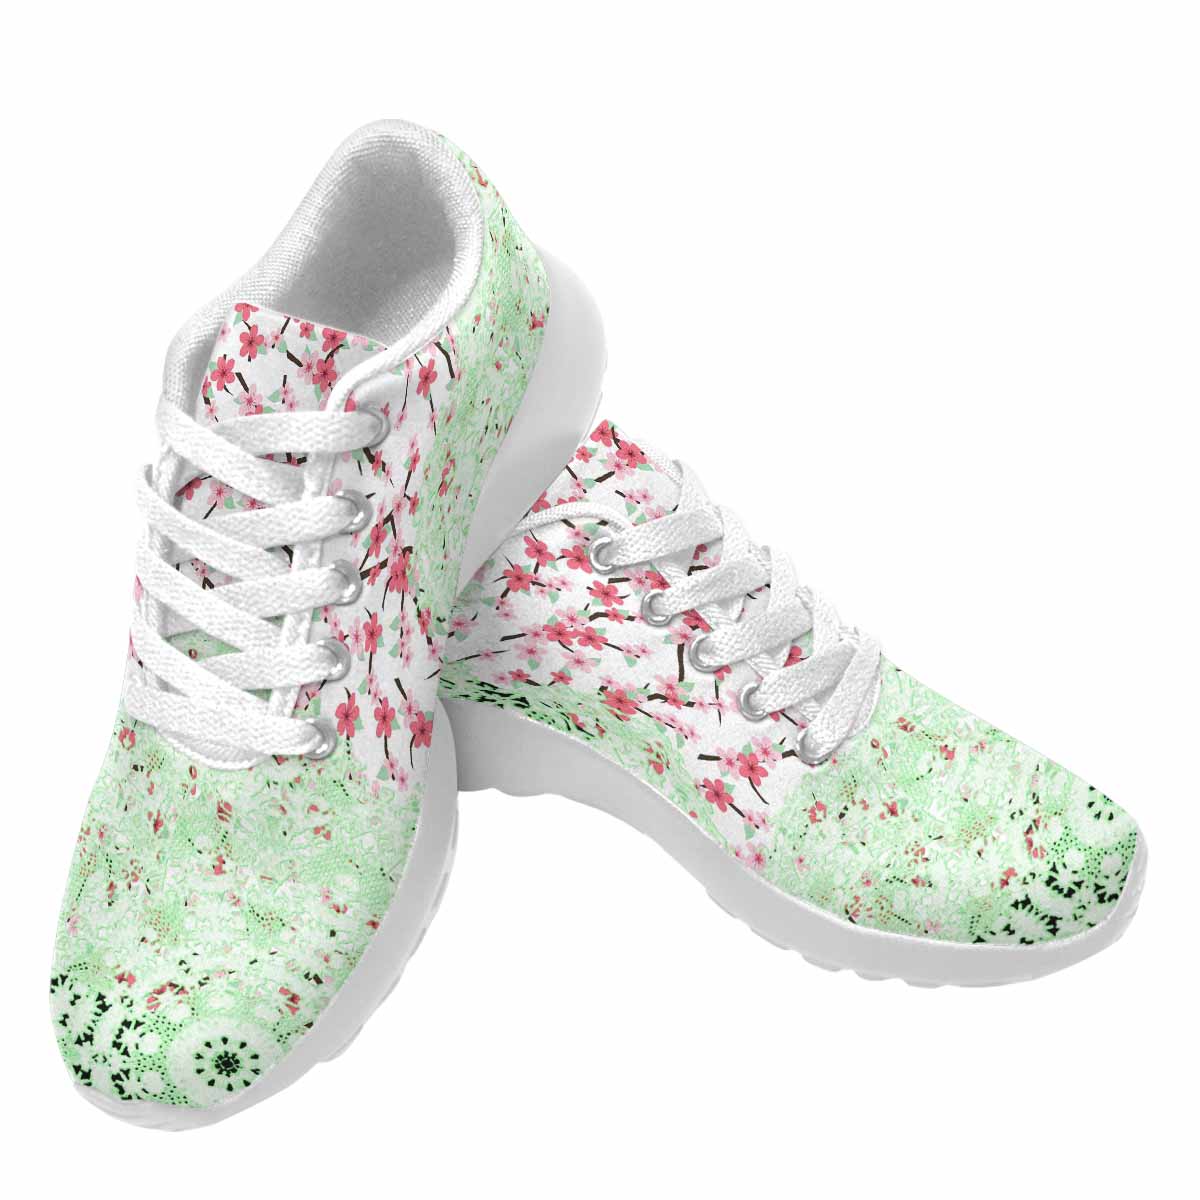 Victorian lace print, womens cute casual or running sneakers, design 10